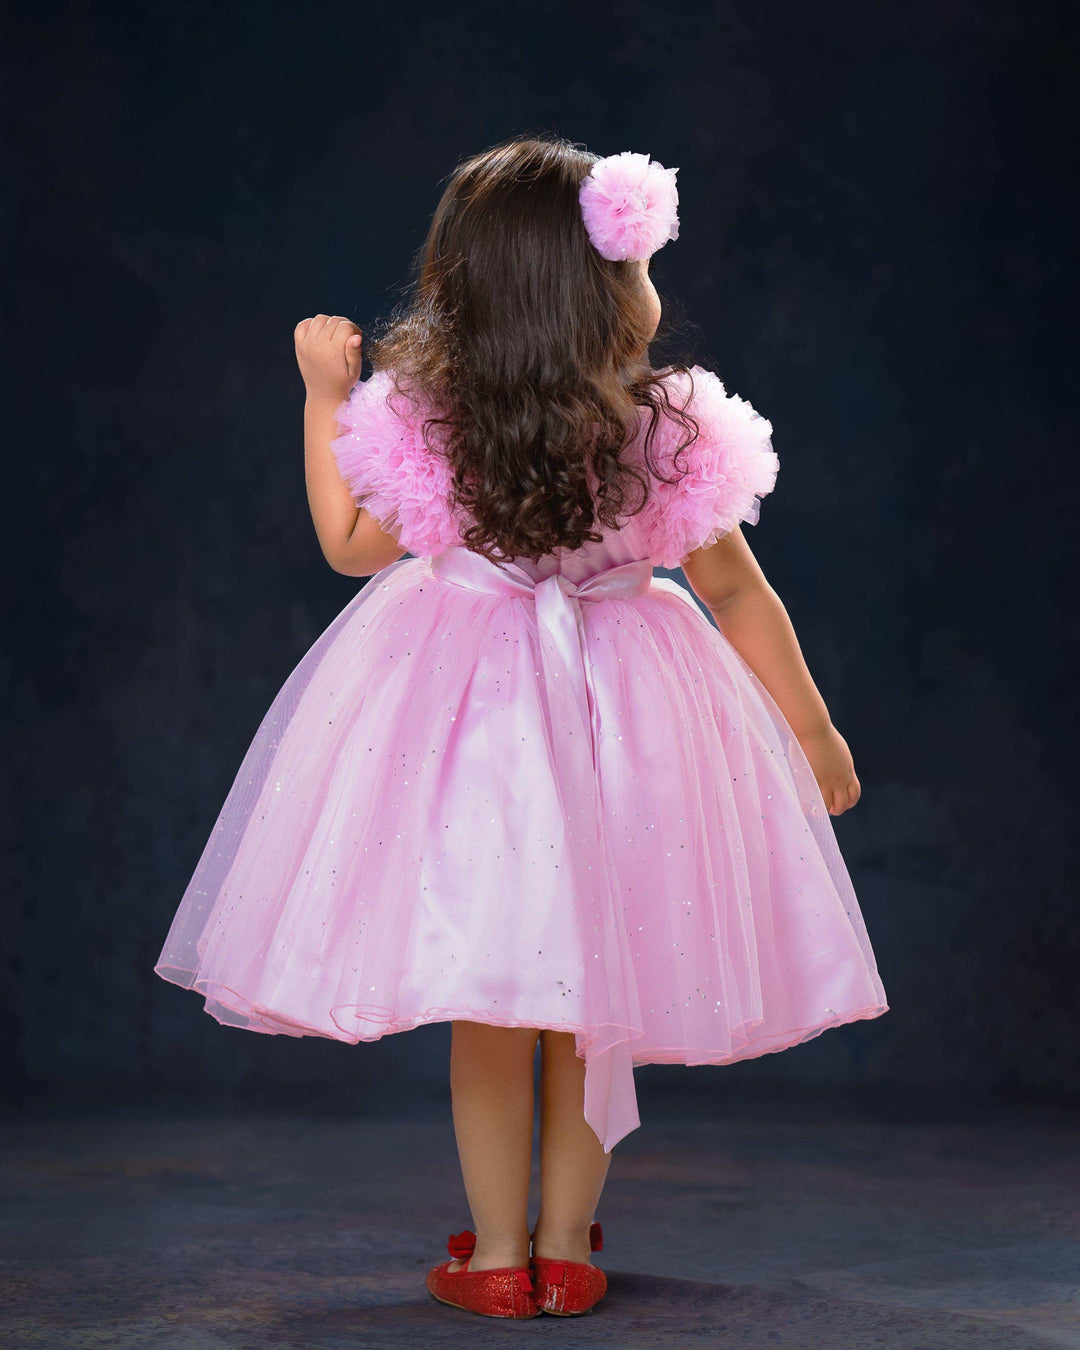 Baby Pink Glitter Baby-Girls Party Perfect Birthday Frock

Material Baby pink shade glitter party perfect frock is made with soft nylon net fabric. The yoke portion of the frock is designed in transparent neck with pleated